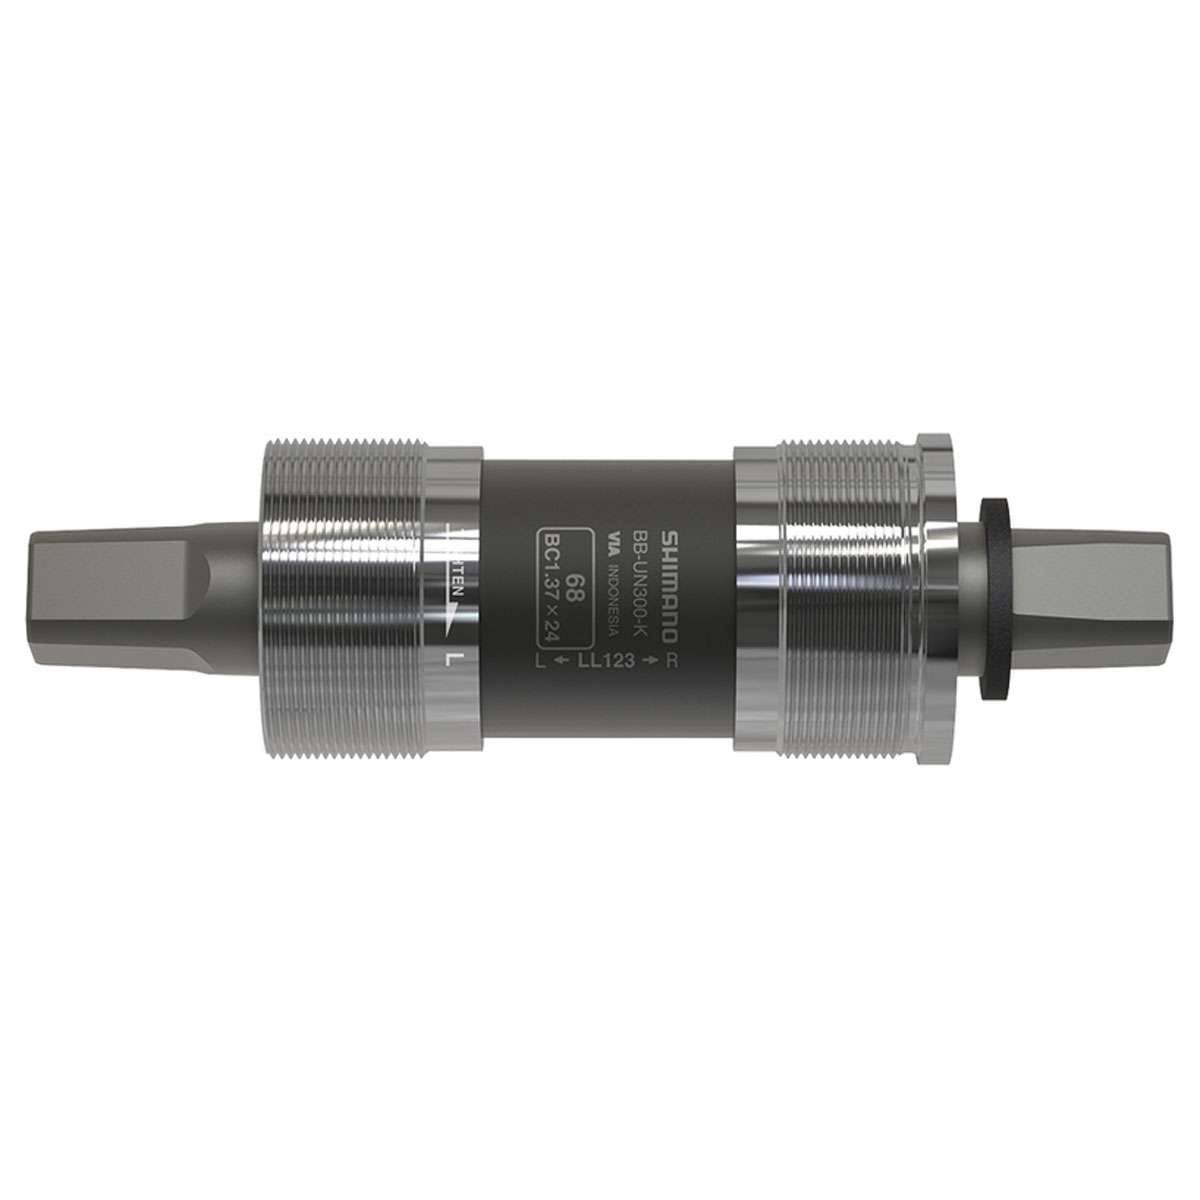 Shimano BB-UN300 BSA 68 Square Taper Bottom Bracket for Chain Case Mounting 127mm